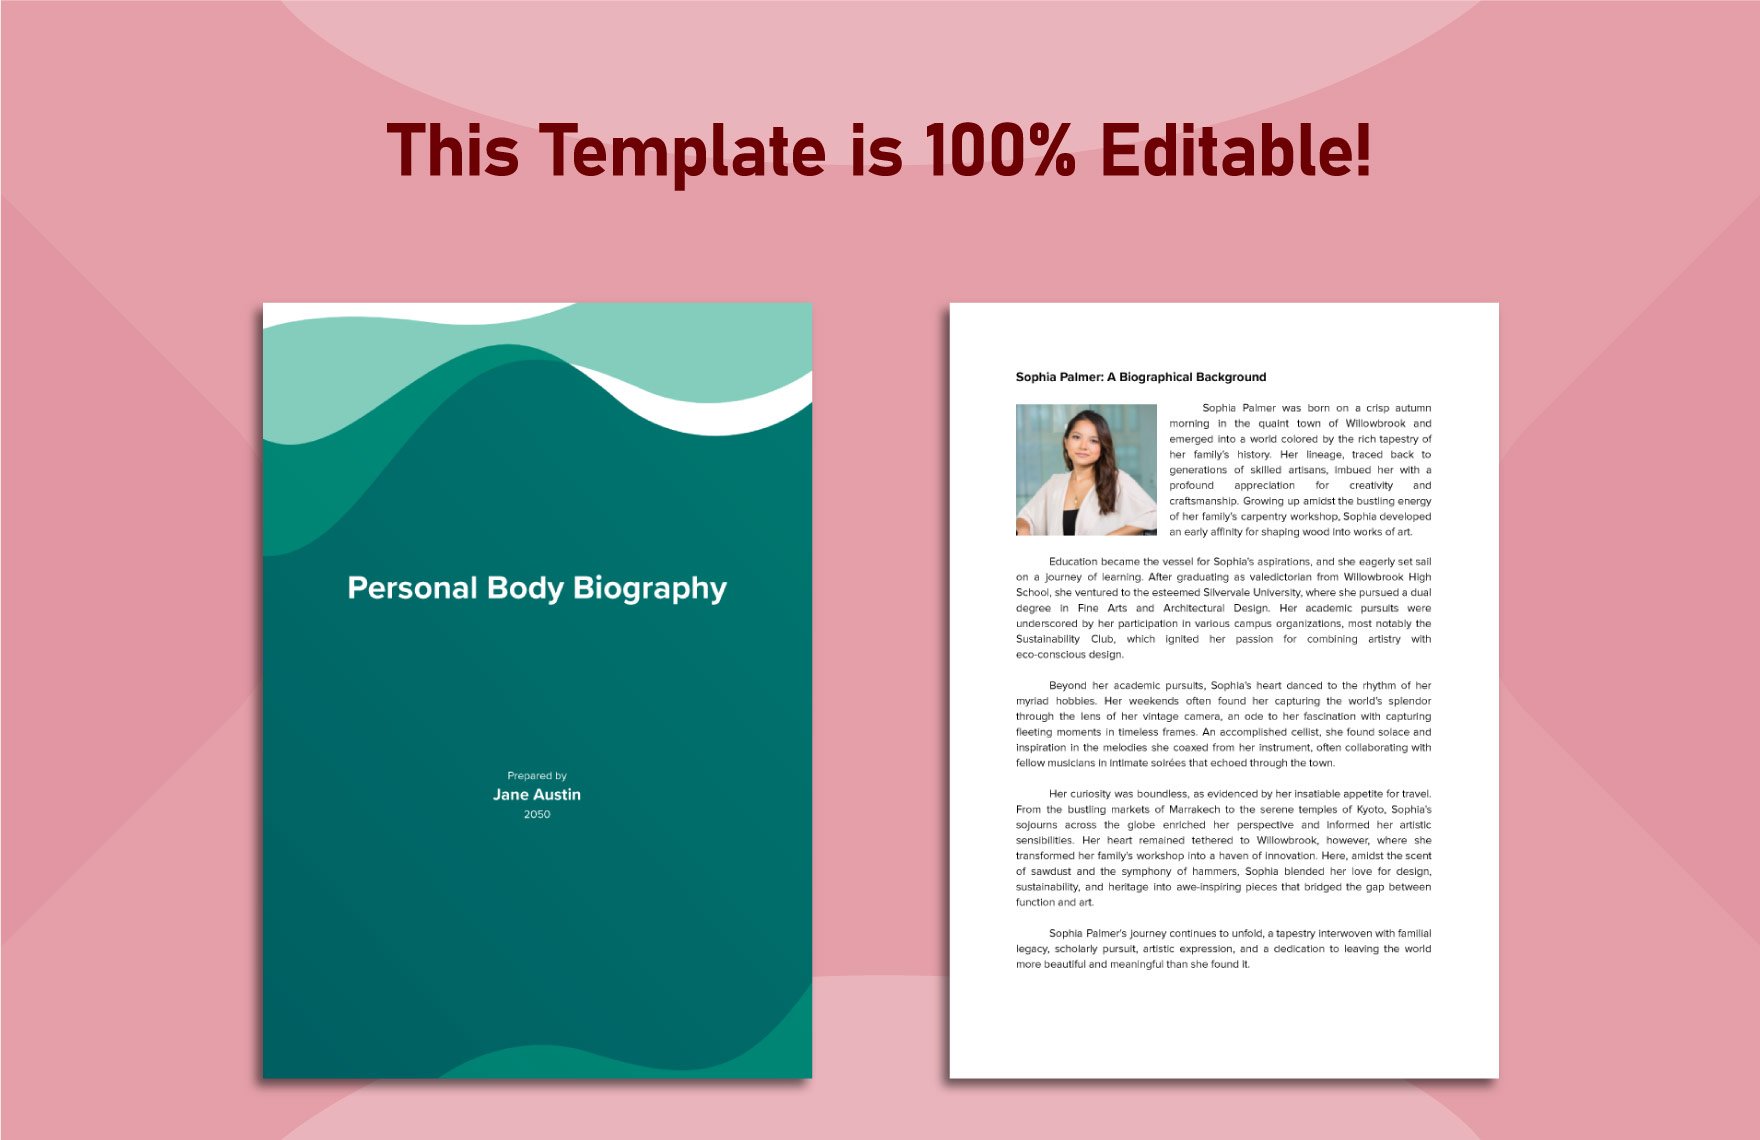 Personal Body Biography Template Download in Word, Google Docs, PDF